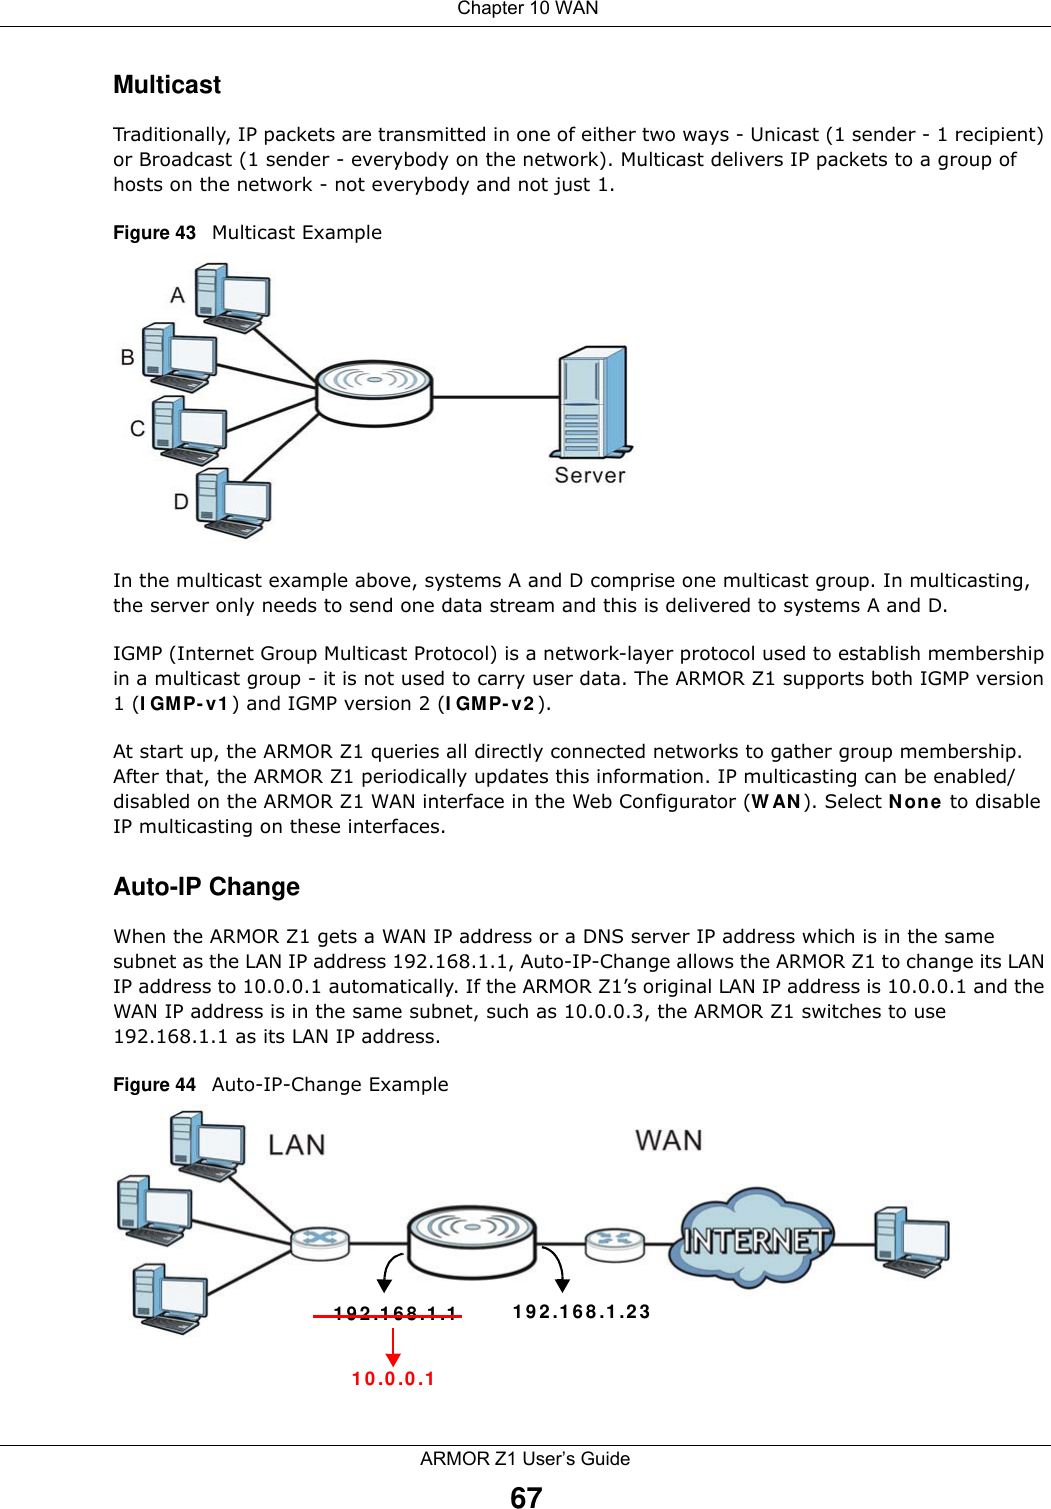  Chapter 10 WANARMOR Z1 User’s Guide67MulticastTraditionally, IP packets are transmitted in one of either two ways - Unicast (1 sender - 1 recipient) or Broadcast (1 sender - everybody on the network). Multicast delivers IP packets to a group of hosts on the network - not everybody and not just 1. Figure 43   Multicast ExampleIn the multicast example above, systems A and D comprise one multicast group. In multicasting, the server only needs to send one data stream and this is delivered to systems A and D. IGMP (Internet Group Multicast Protocol) is a network-layer protocol used to establish membership in a multicast group - it is not used to carry user data. The ARMOR Z1 supports both IGMP version 1 (IGMP-v1) and IGMP version 2 (IGMP-v2). At start up, the ARMOR Z1 queries all directly connected networks to gather group membership. After that, the ARMOR Z1 periodically updates this information. IP multicasting can be enabled/disabled on the ARMOR Z1 WAN interface in the Web Configurator (WAN). Select None to disable IP multicasting on these interfaces.Auto-IP ChangeWhen the ARMOR Z1 gets a WAN IP address or a DNS server IP address which is in the same subnet as the LAN IP address 192.168.1.1, Auto-IP-Change allows the ARMOR Z1 to change its LAN IP address to 10.0.0.1 automatically. If the ARMOR Z1’s original LAN IP address is 10.0.0.1 and the WAN IP address is in the same subnet, such as 10.0.0.3, the ARMOR Z1 switches to use 192.168.1.1 as its LAN IP address.Figure 44   Auto-IP-Change Example192.168.1.1 192.168.1.2310.0.0.1